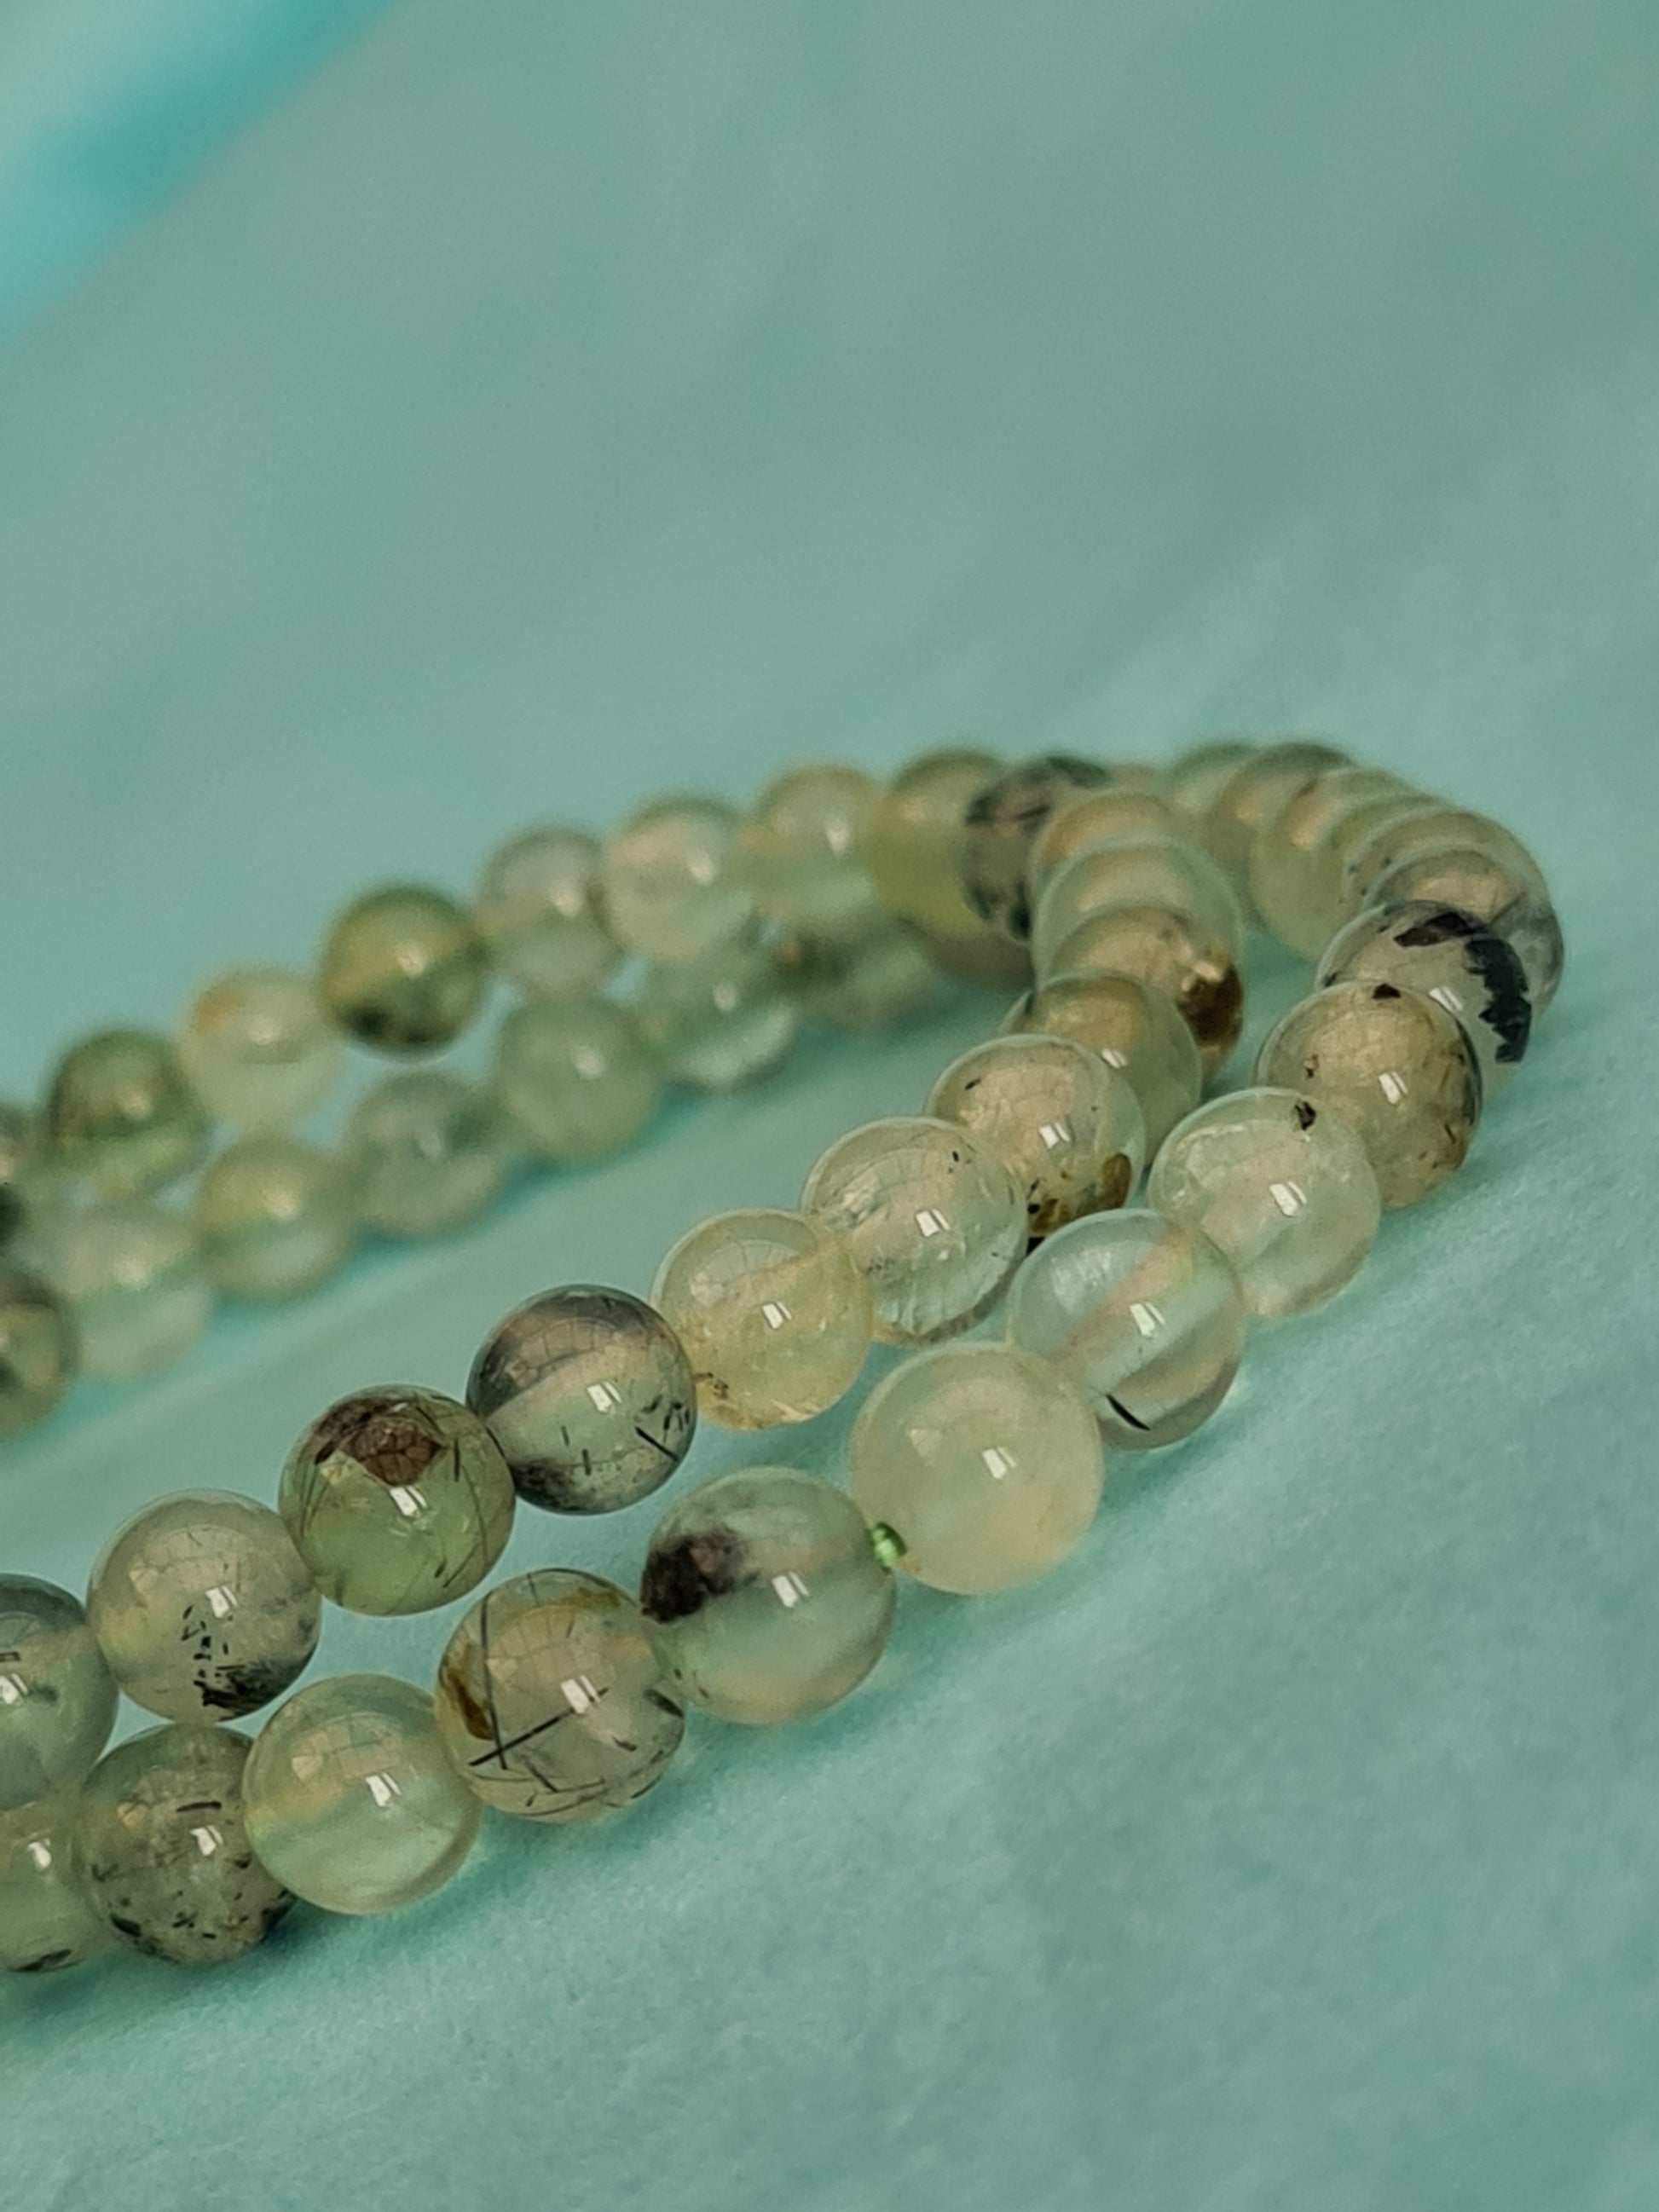 Two 6mm Beaded Bracelets in Green Prehnite with Epidote Inclusions